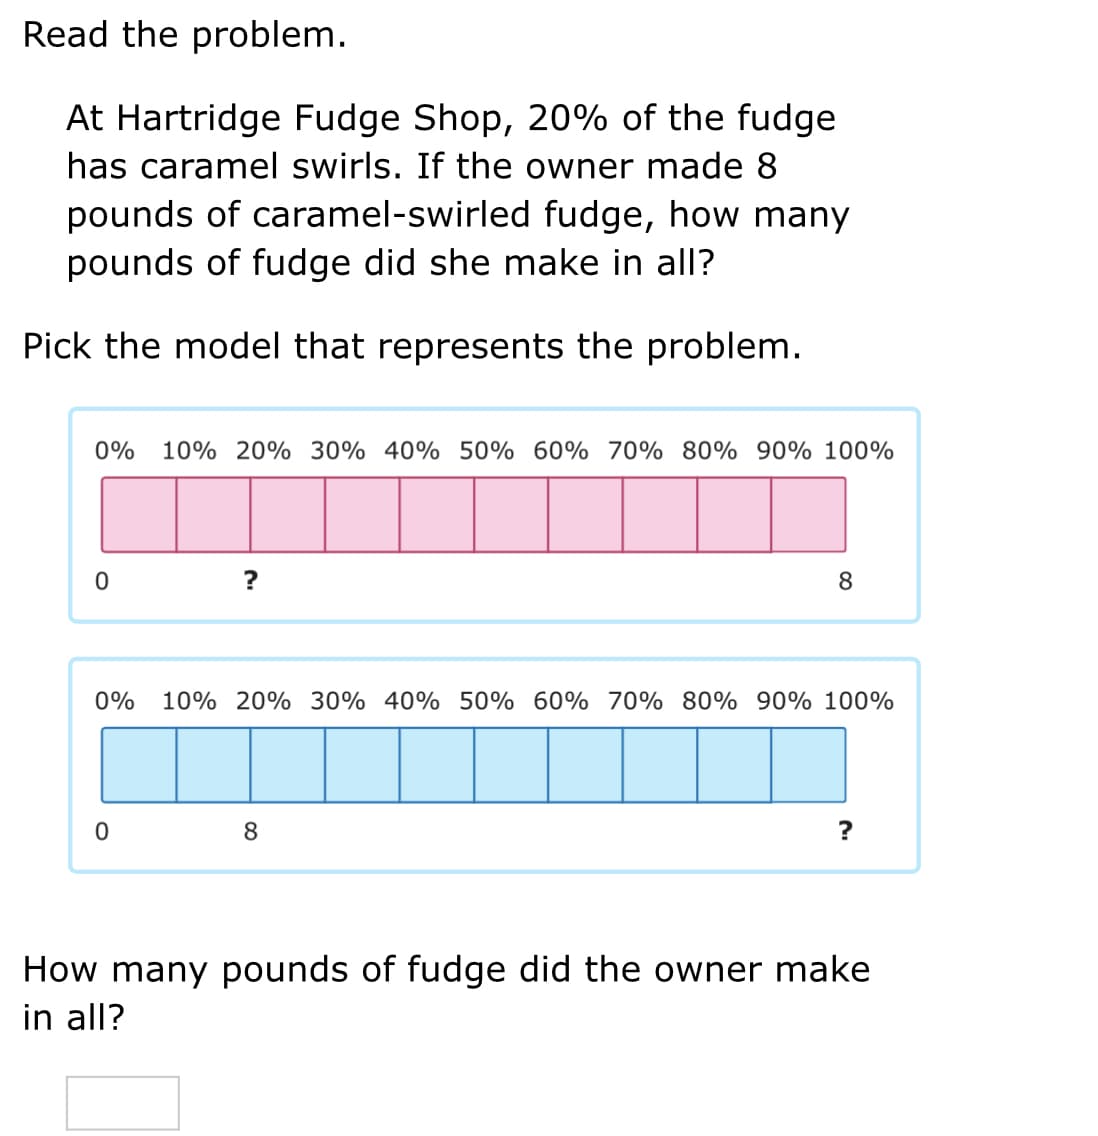 Read the problem.
At Hartridge Fudge Shop, 20% of the fudge
has caramel swirls. If the owner made 8
pounds of caramel-swirled fudge, how many
pounds of fudge did she make in all?
Pick the model that represents the problem.
0%
10% 20% 30% 40% 50% 60% 70% 80% 90% 100%
?
8
0%
10% 20% 30% 40% 50% 60% 70% 80% 90% 100%
8
?
How many pounds of fudge did the owner make
in all?
